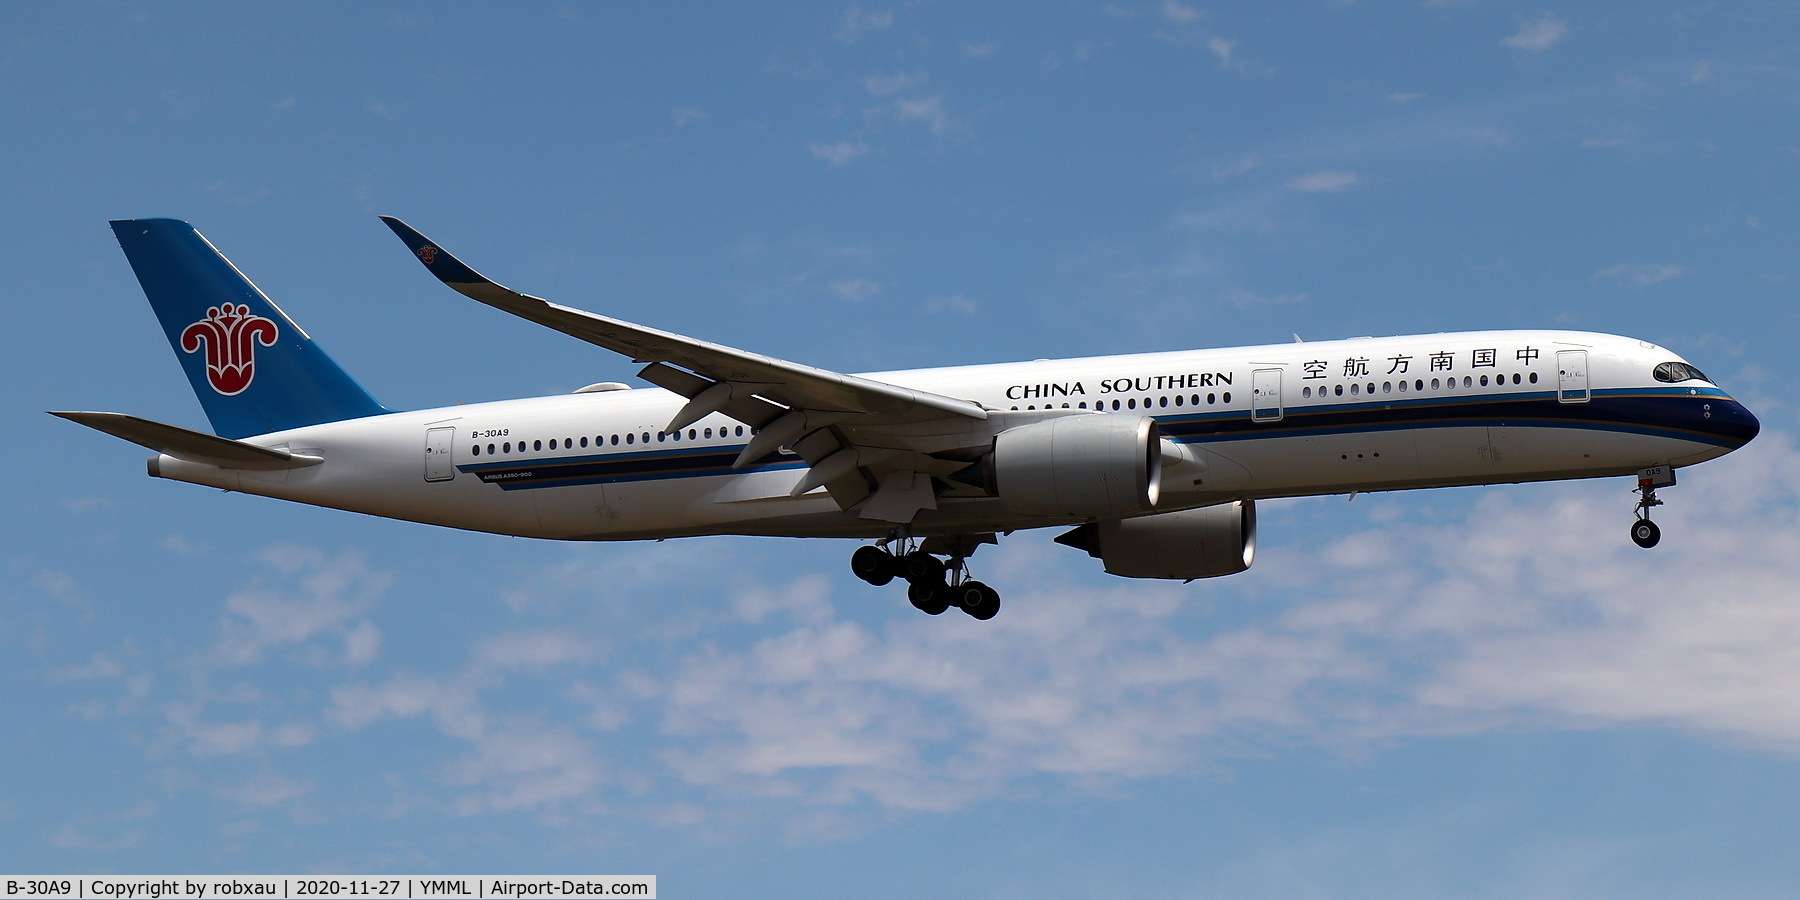 B-30A9, 2019 Airbus A350-941 C/N 339, On short final for Melbourne runway 34